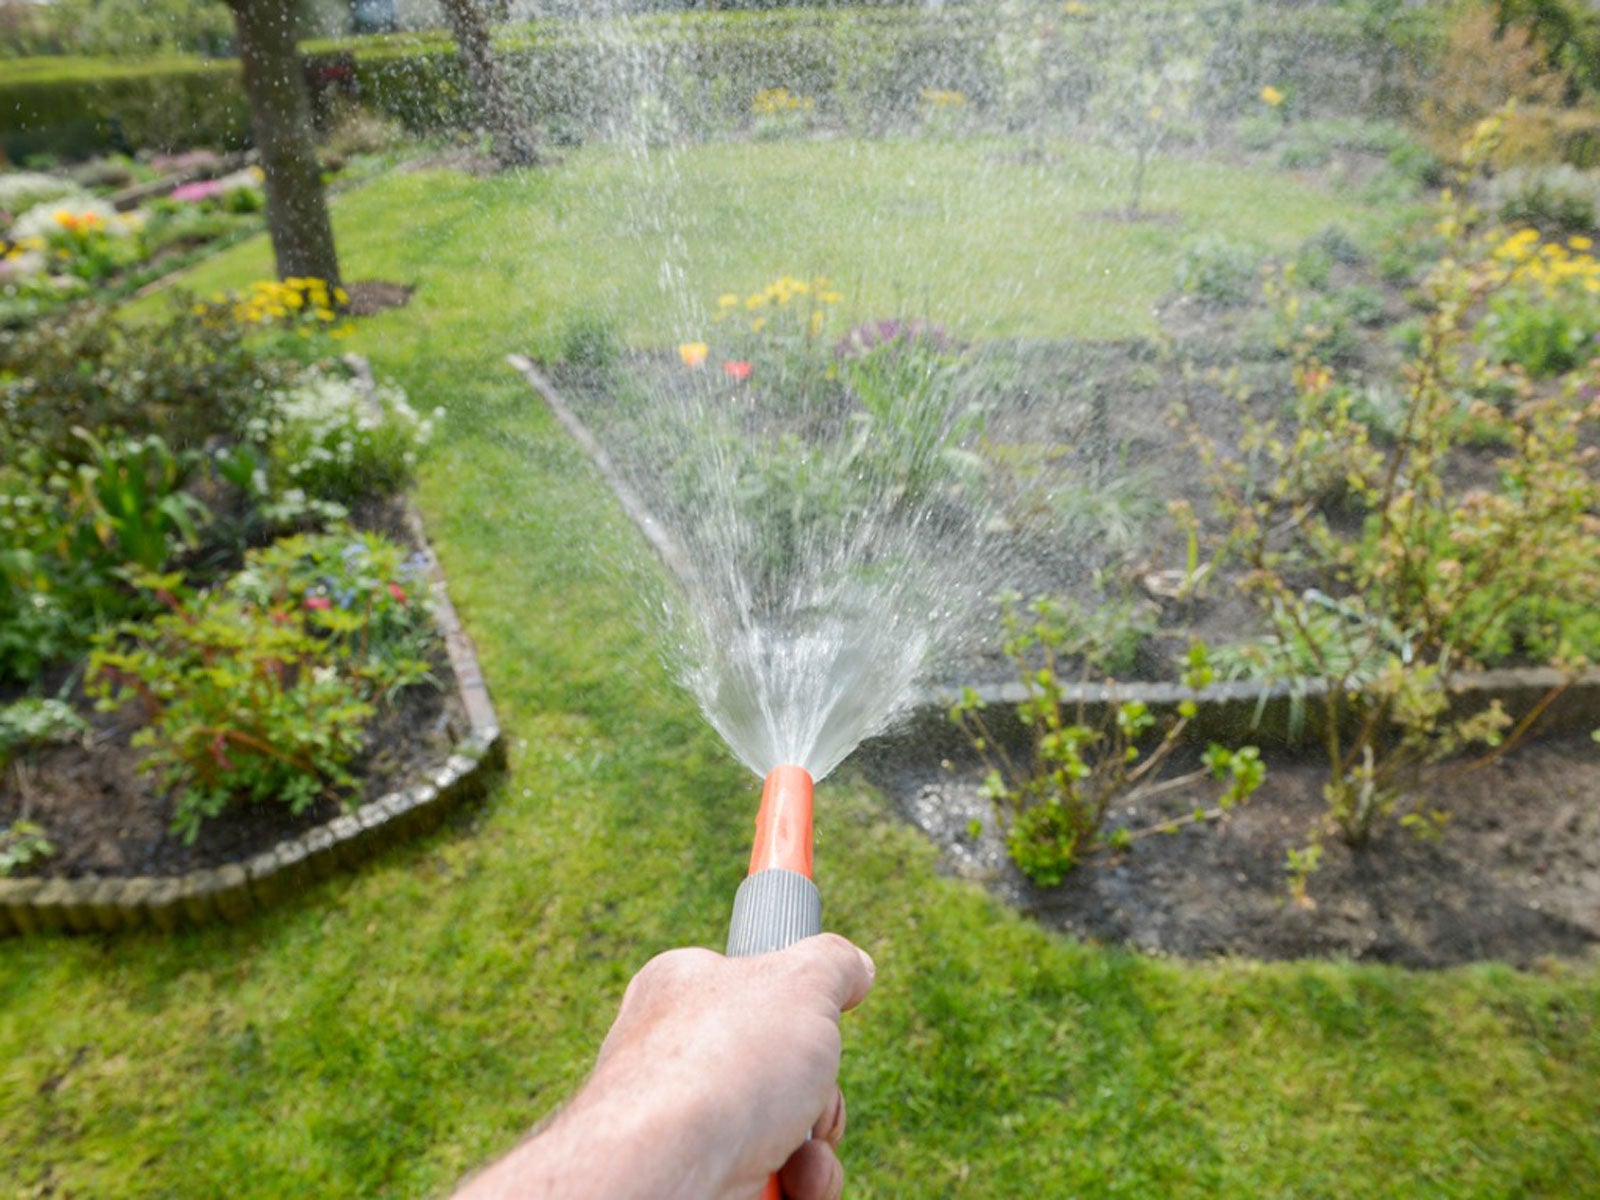 Watering Gardens Learn How To Water A, How To Water Your Garden